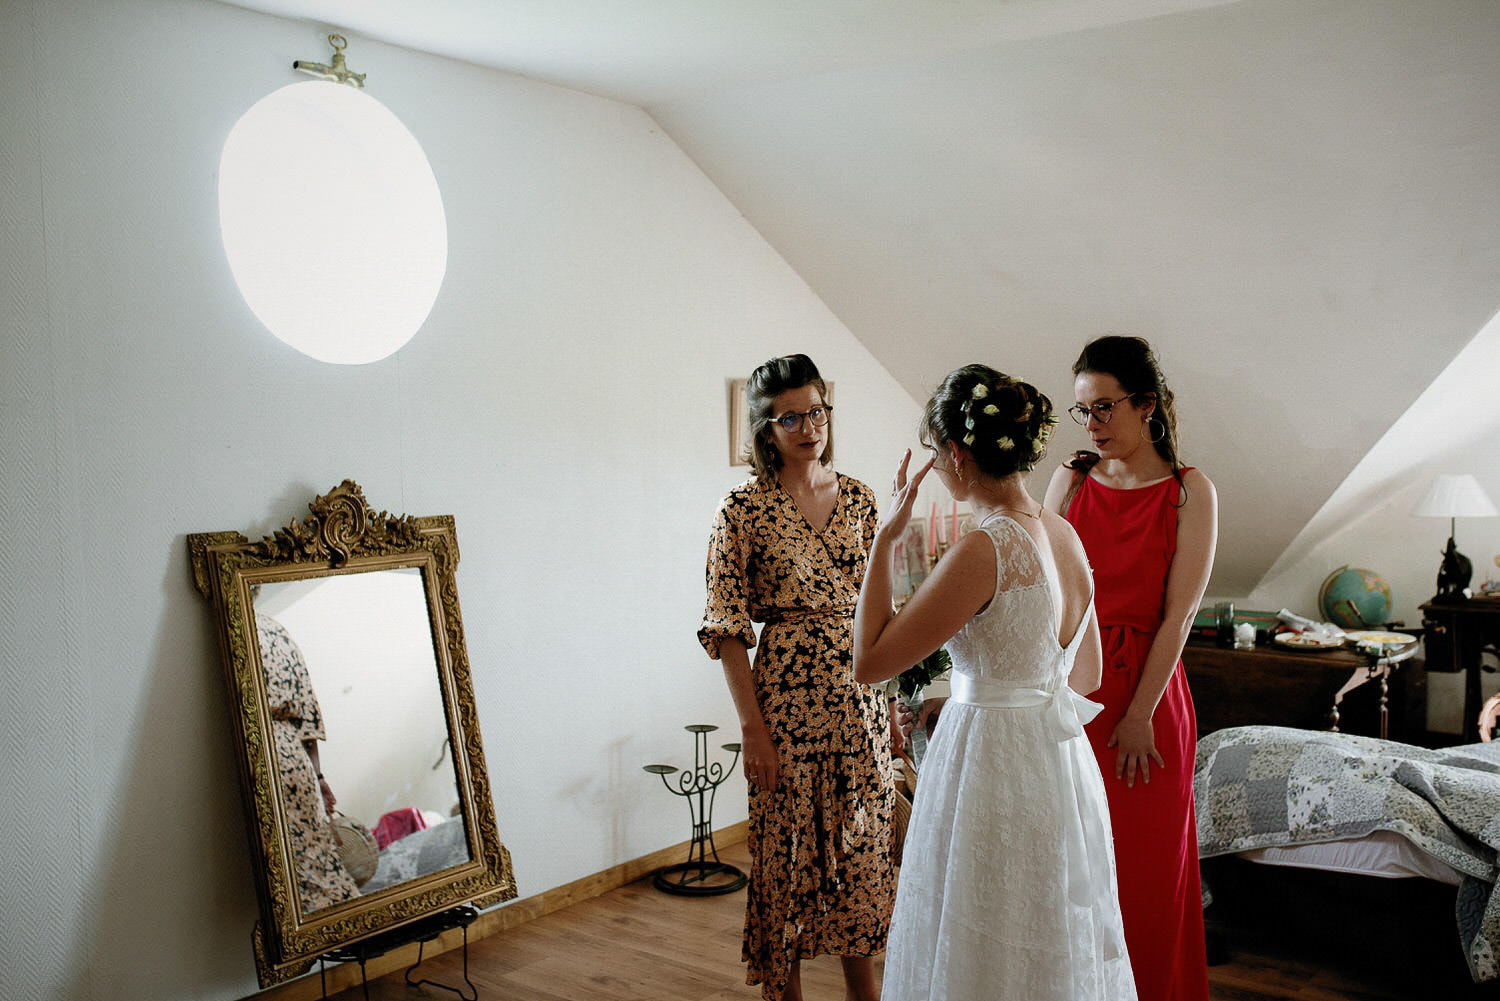 Charming Destination Wedding in the Portuguese Countryside - bride and her bridesmaids sharing an emotional moment during the morning preparations